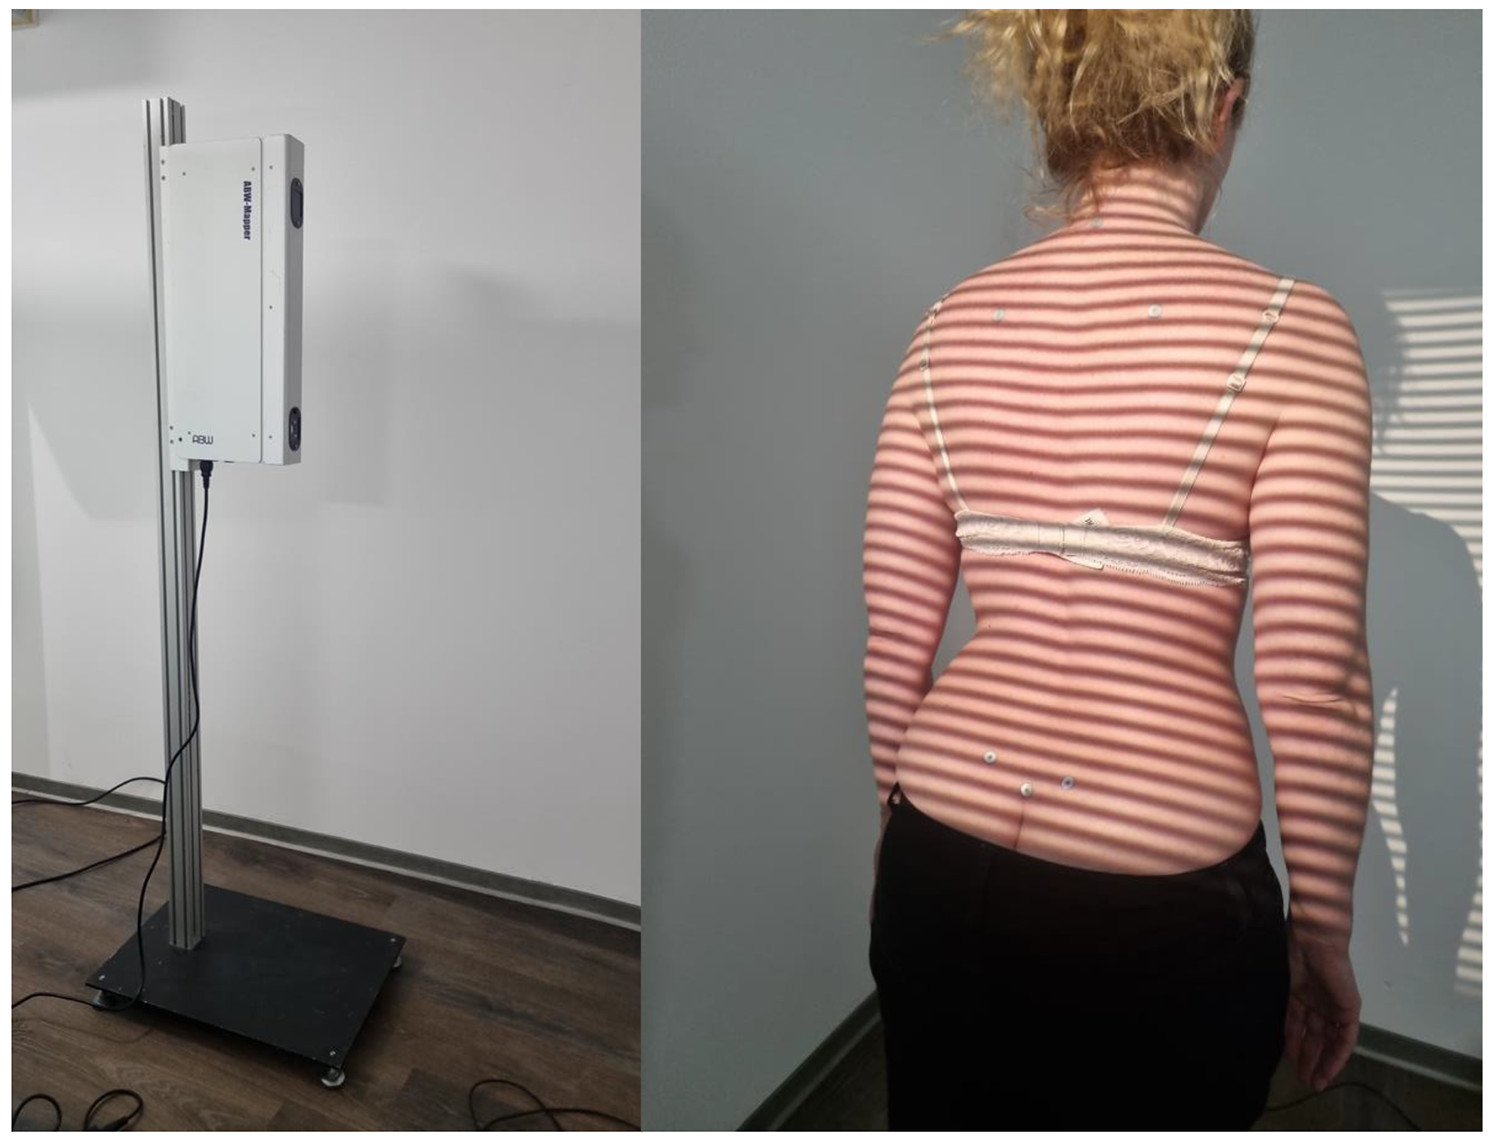 Differences in upper body posture between patients with lumbar spine syndrome and healthy individuals under the consideration of sex, age and BMI